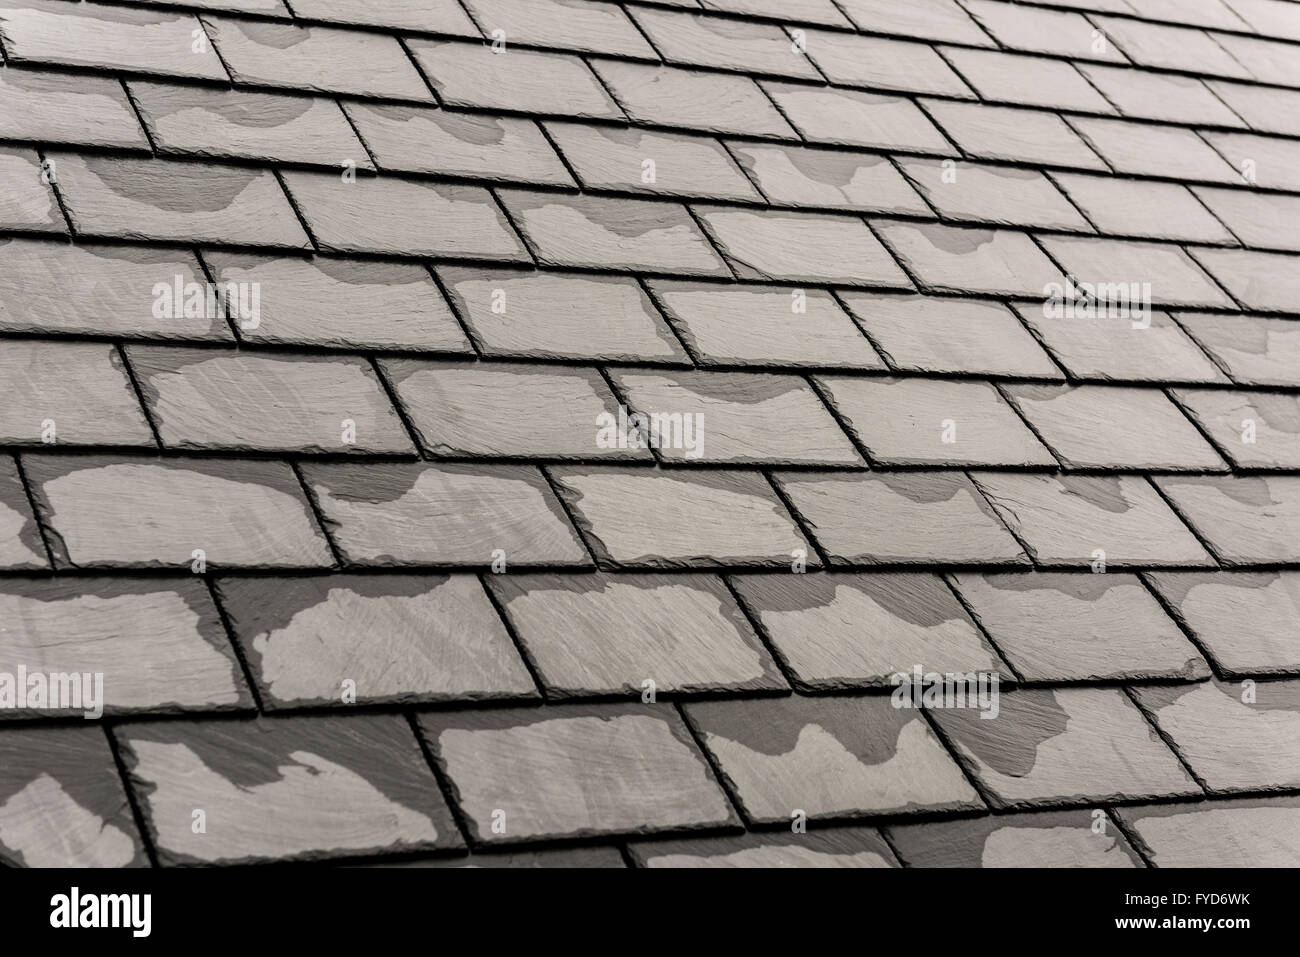 Slate roof tiles on building Stock Photo